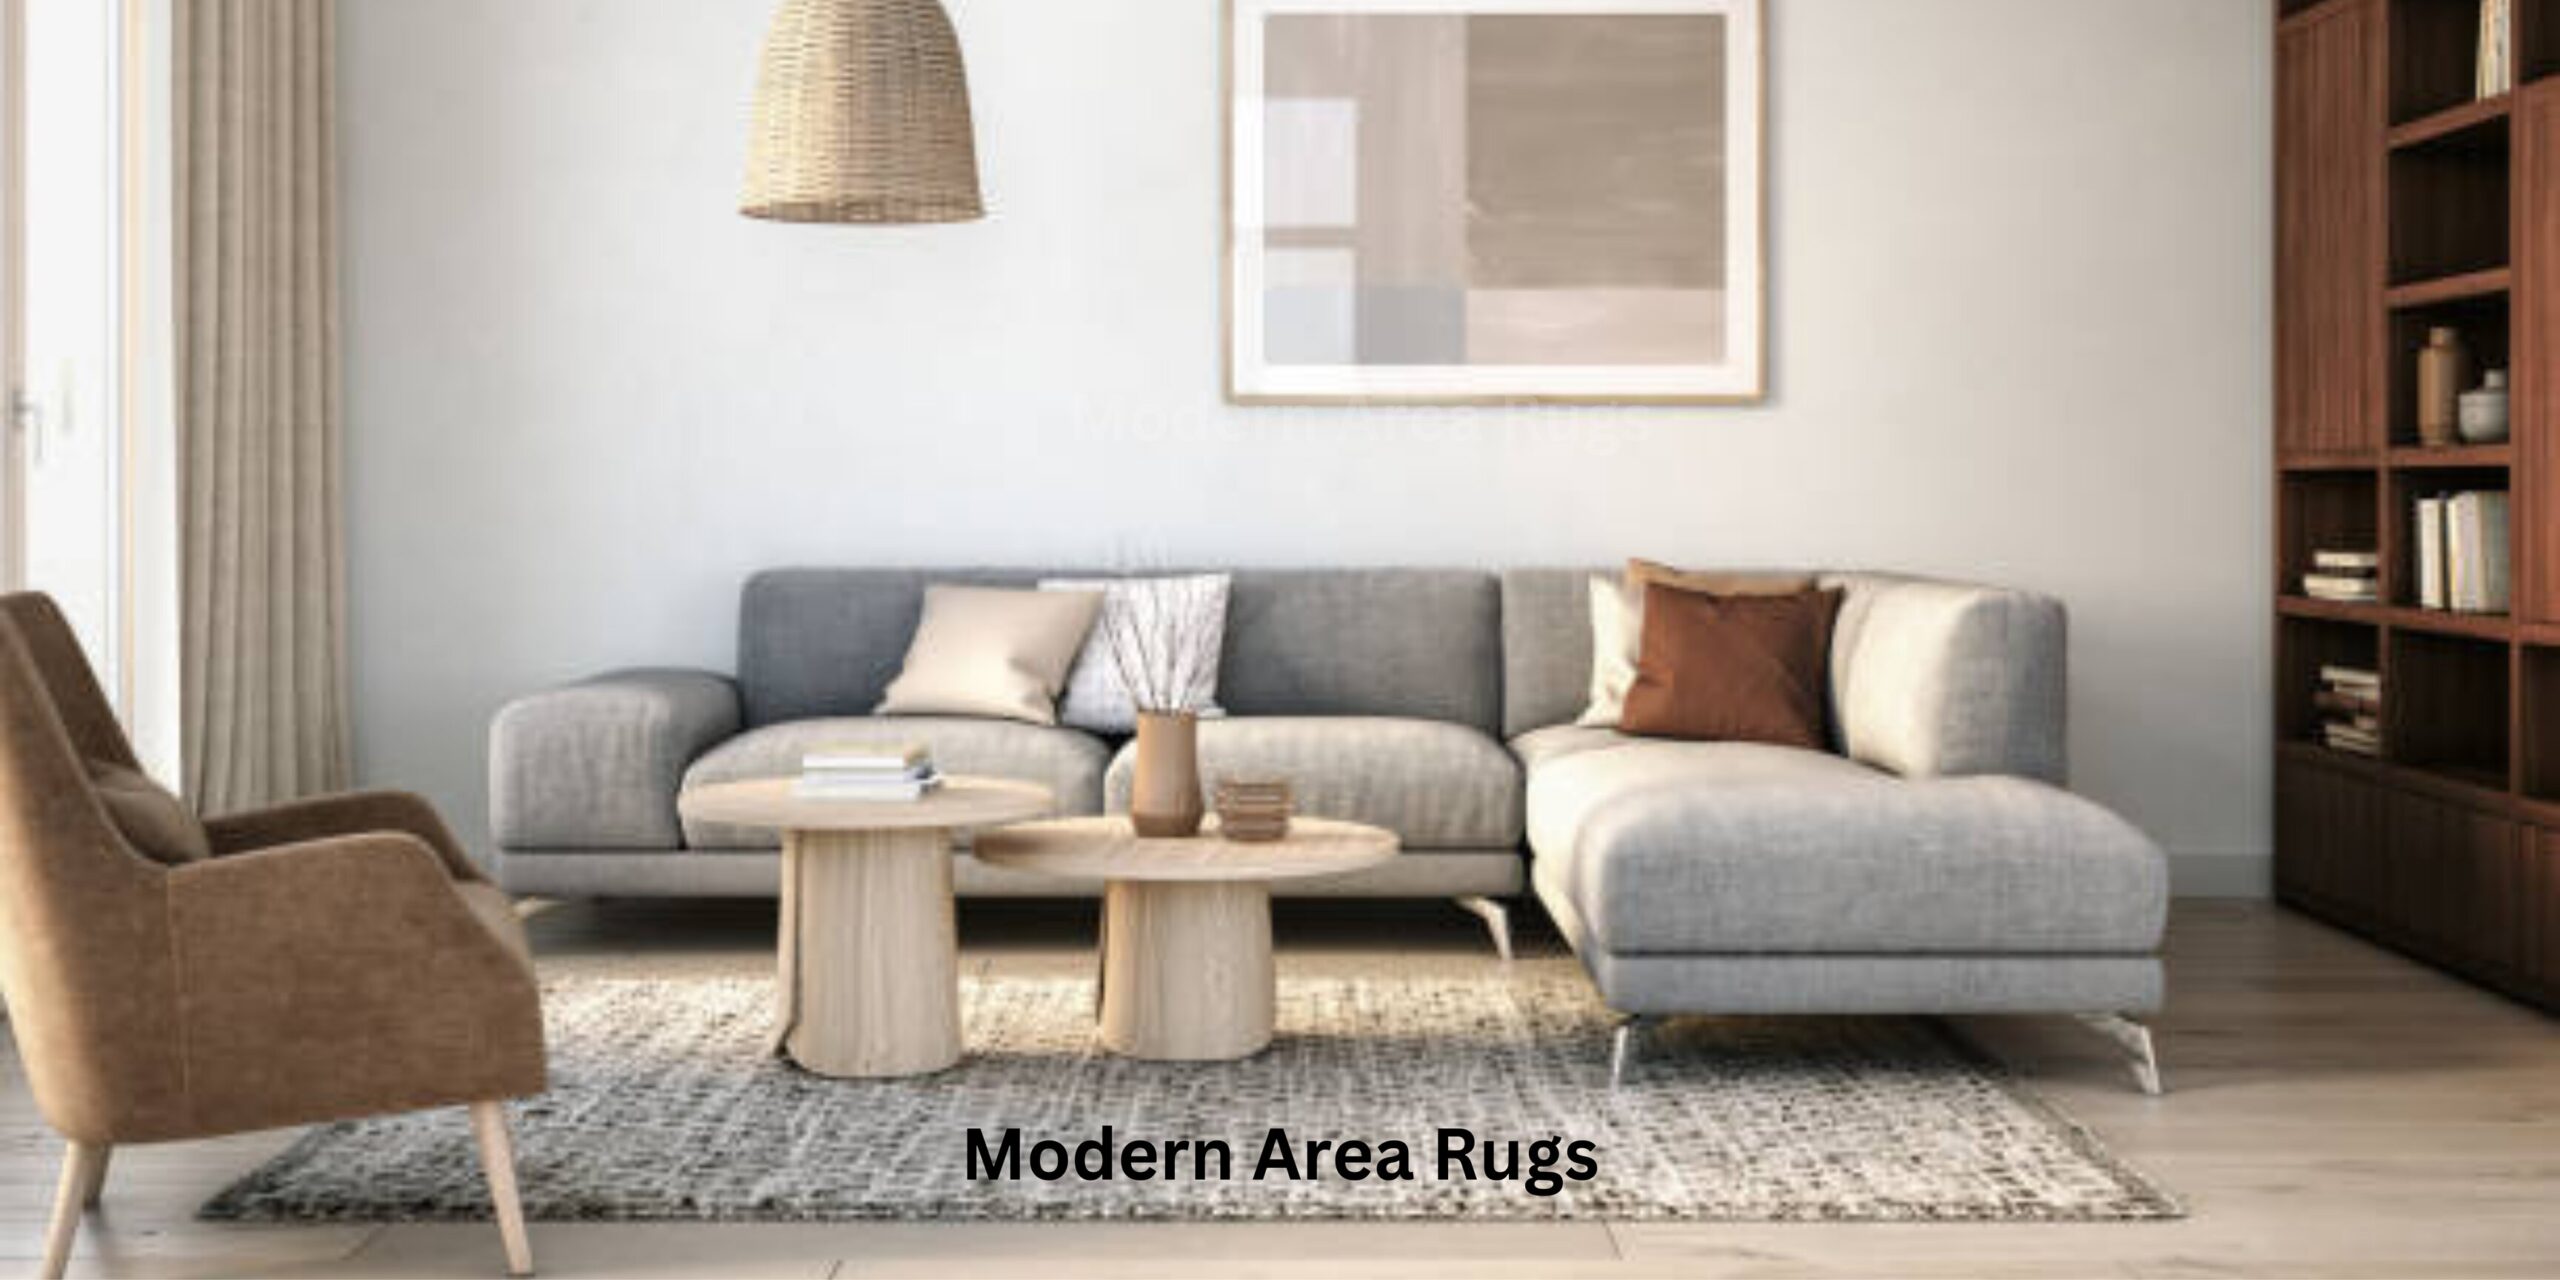 Enhancing Home Decor with the Best Modern Area Rugs